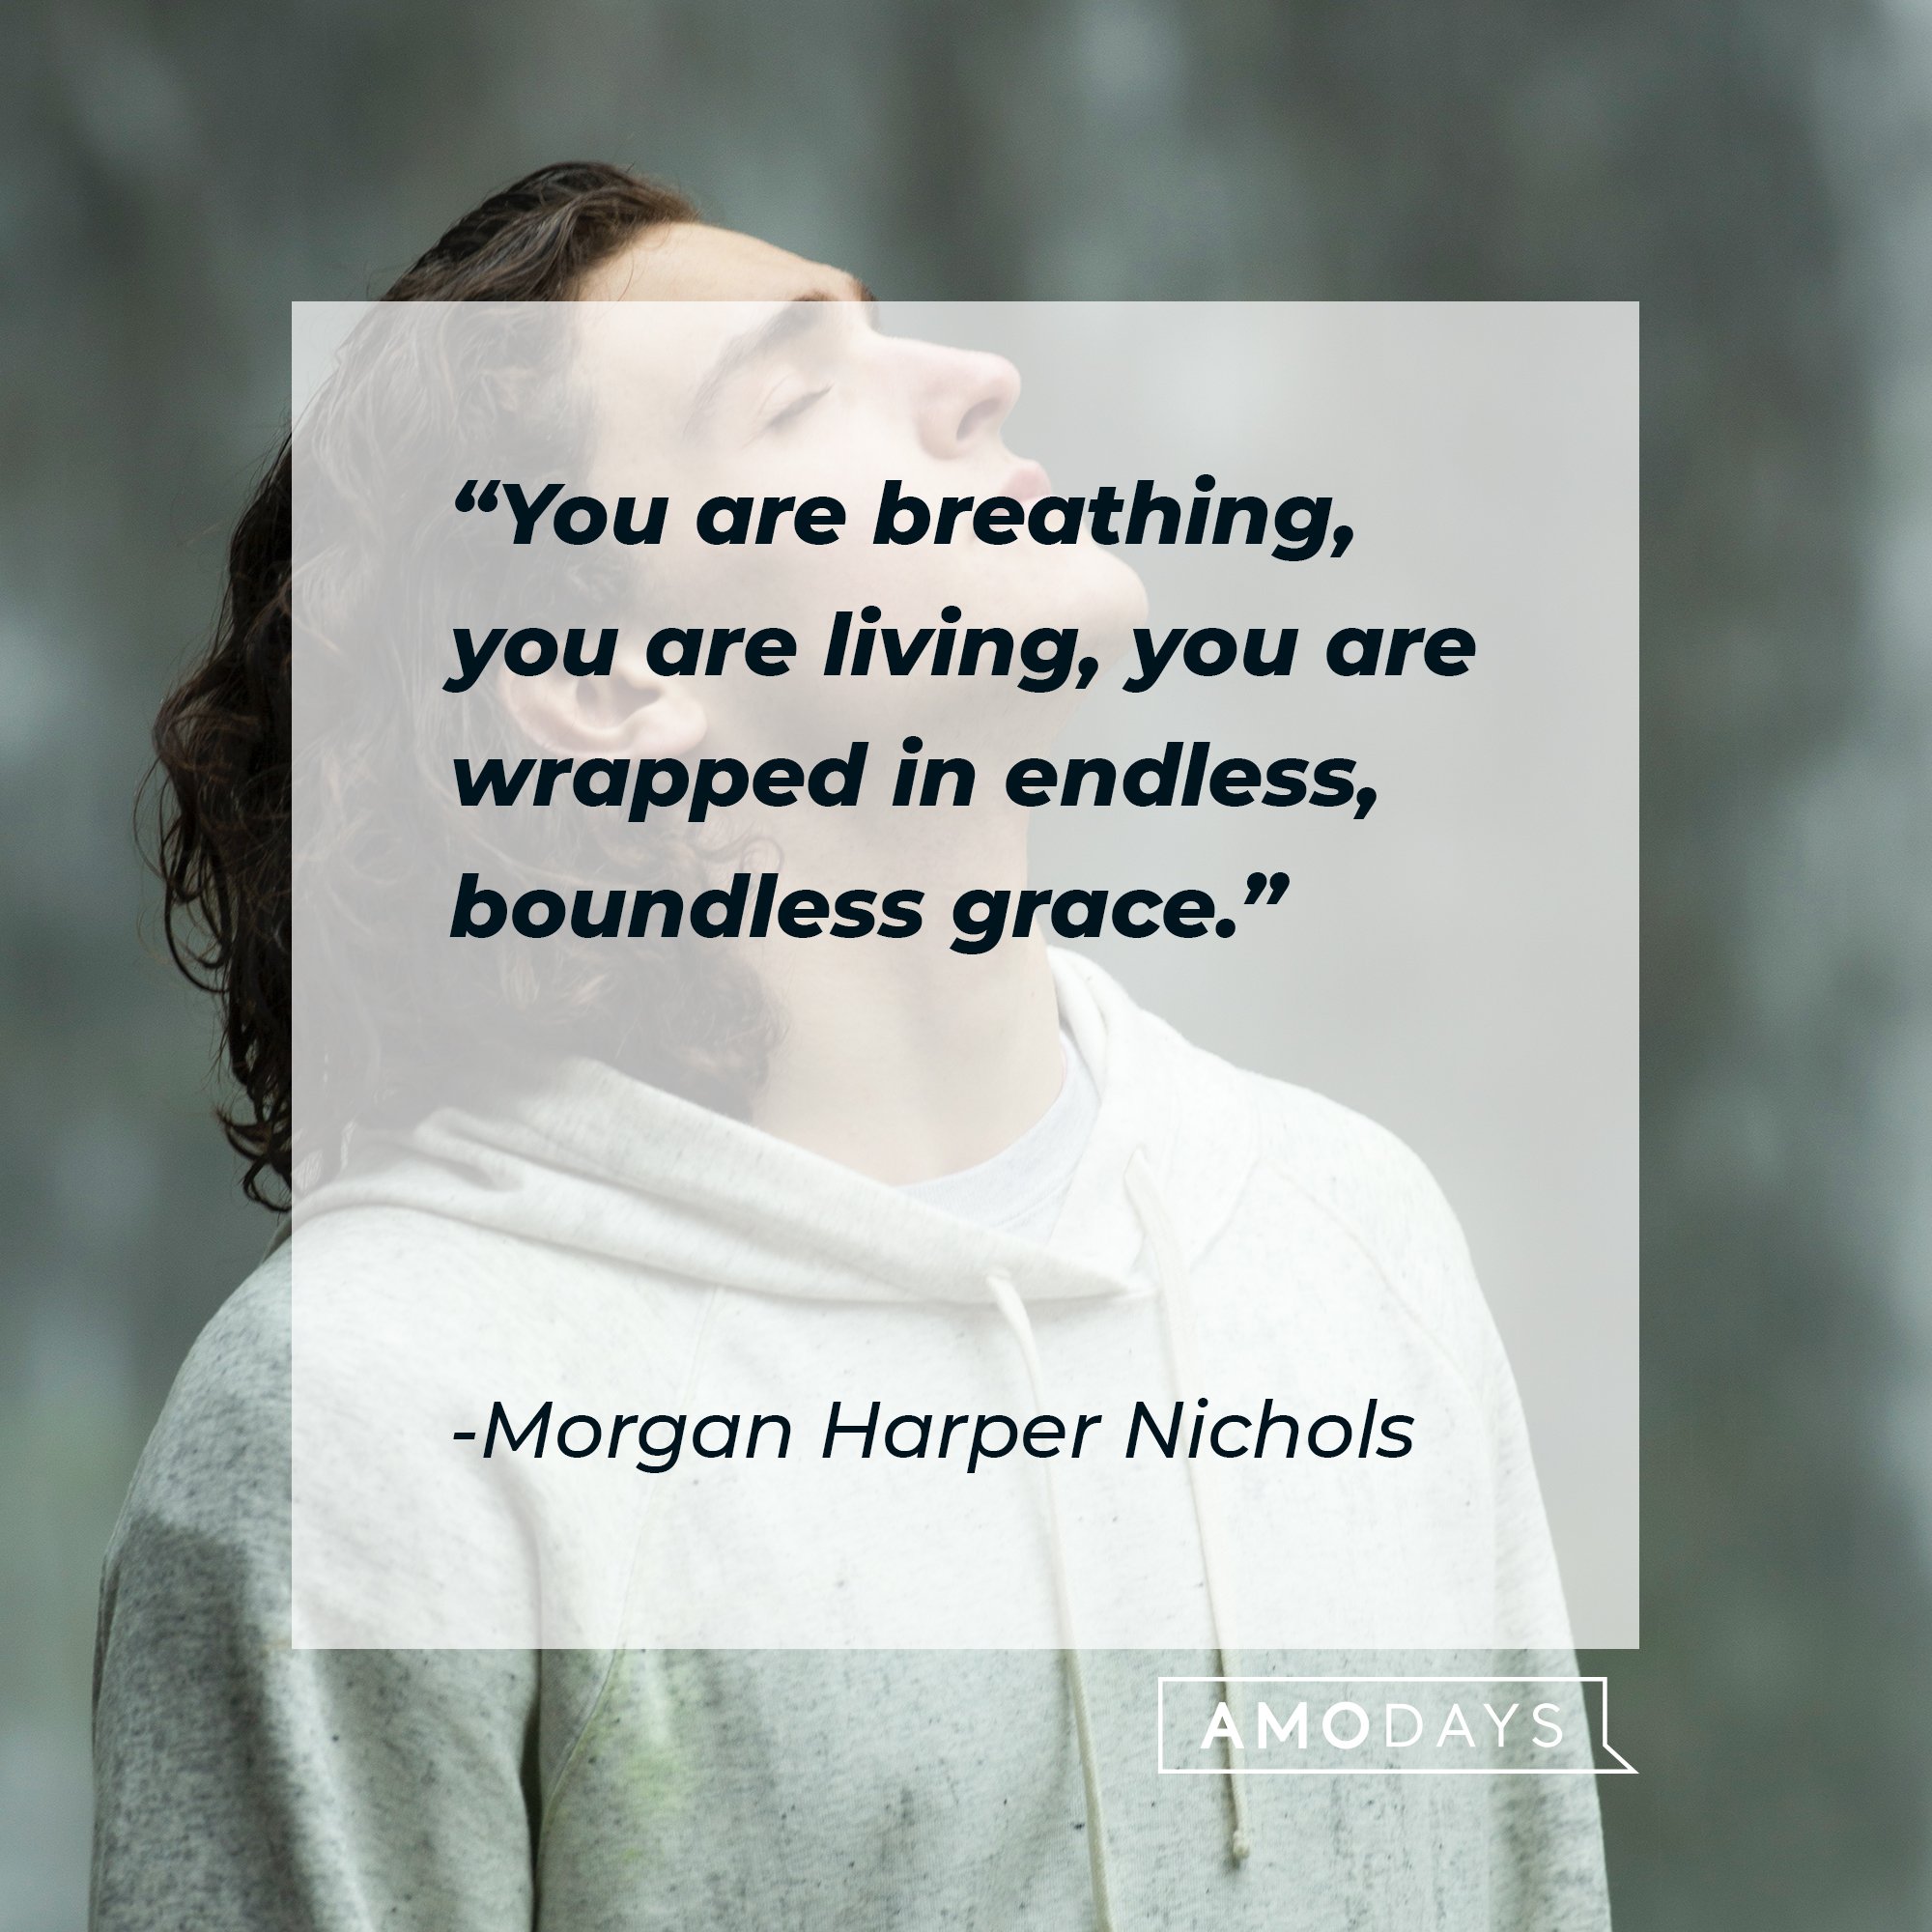 Morgan Harper Nichols’ quote: "You are breathing, you are living, you are wrapped in endless, boundless grace." | Image: AmoDays